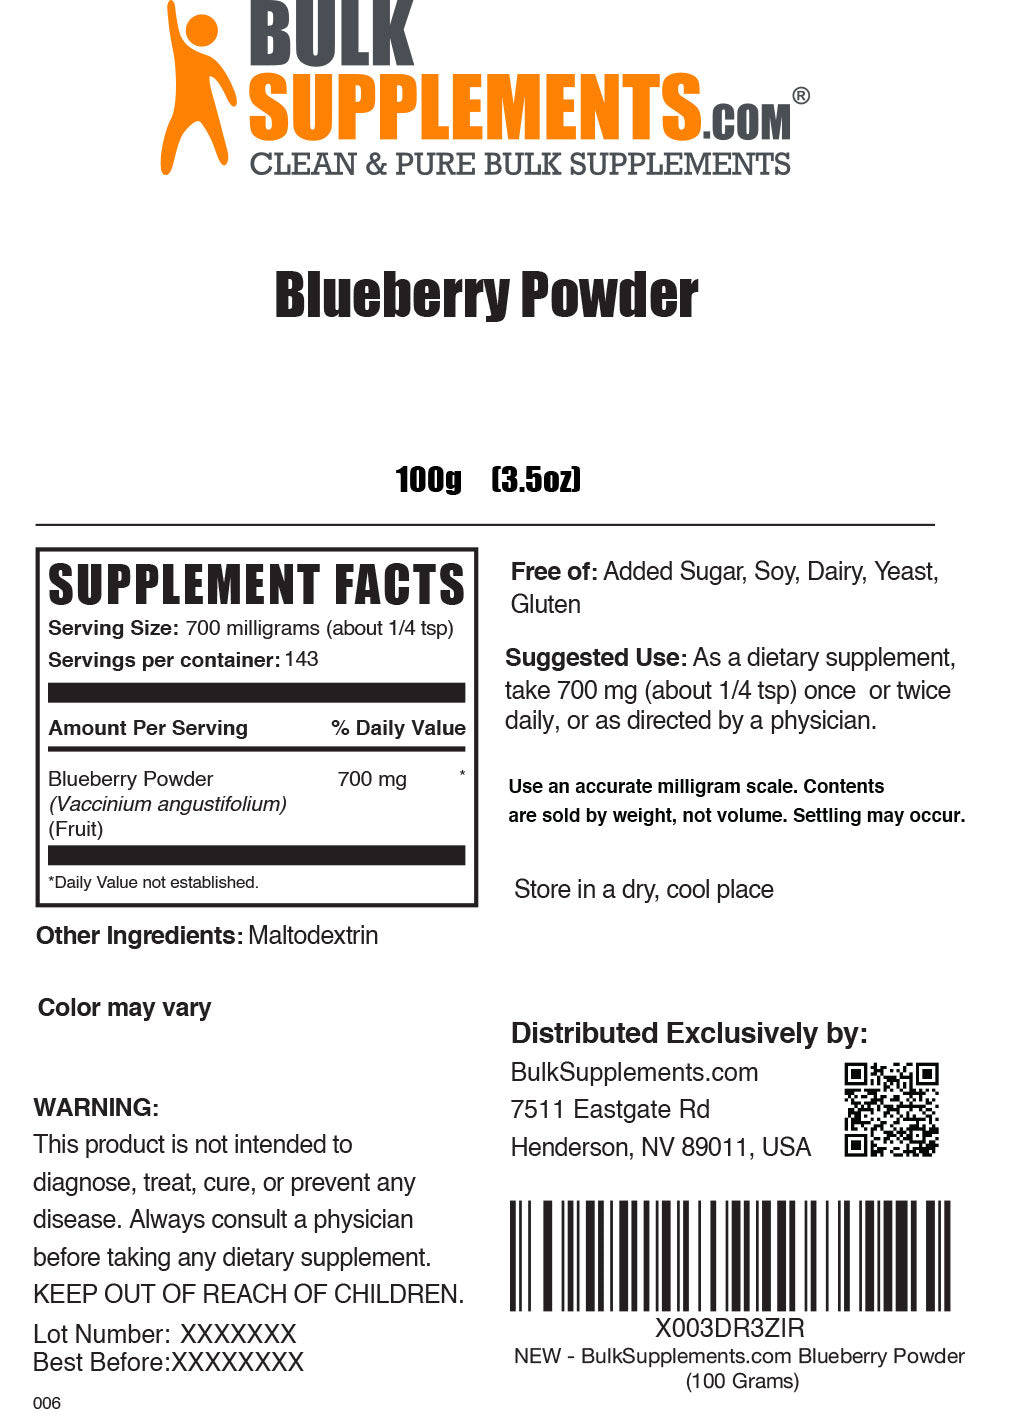 100g of Blueberry Powder Supplement Facts